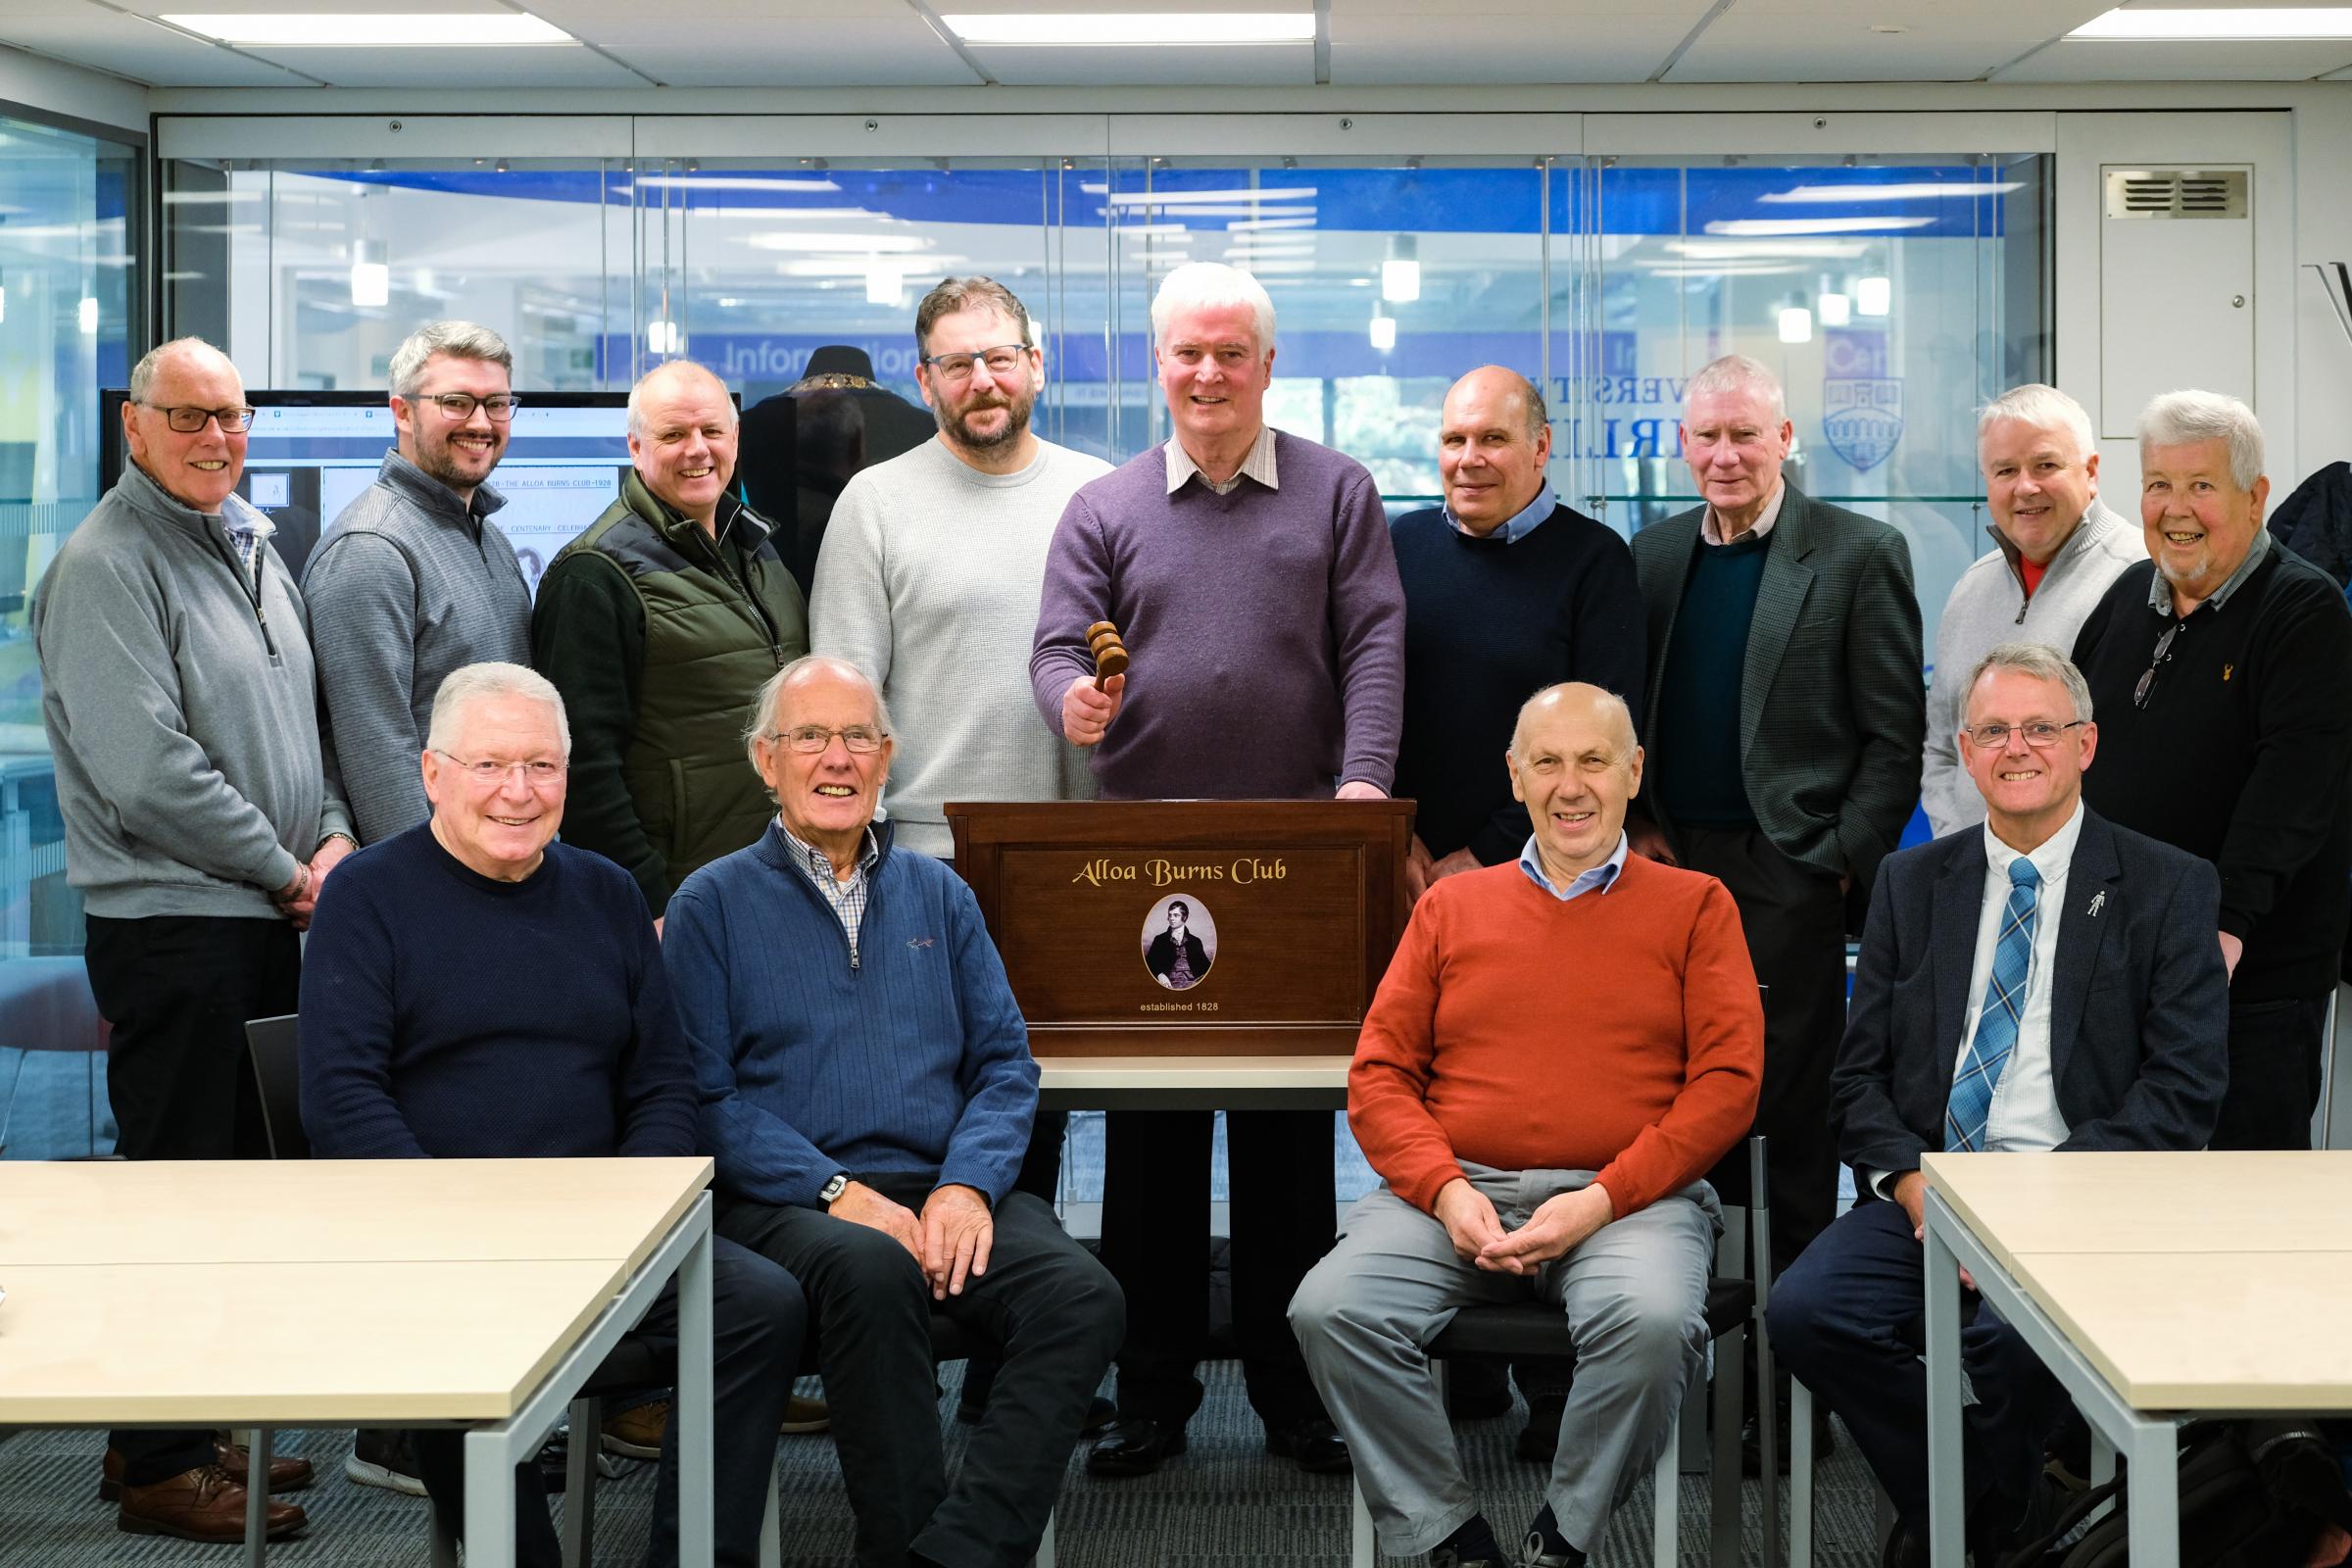 CELEBRATION: Members of the club were invited to the university last week before the physical records went to the Speirs Centre in Alloa - Picture by Glenn Bailes